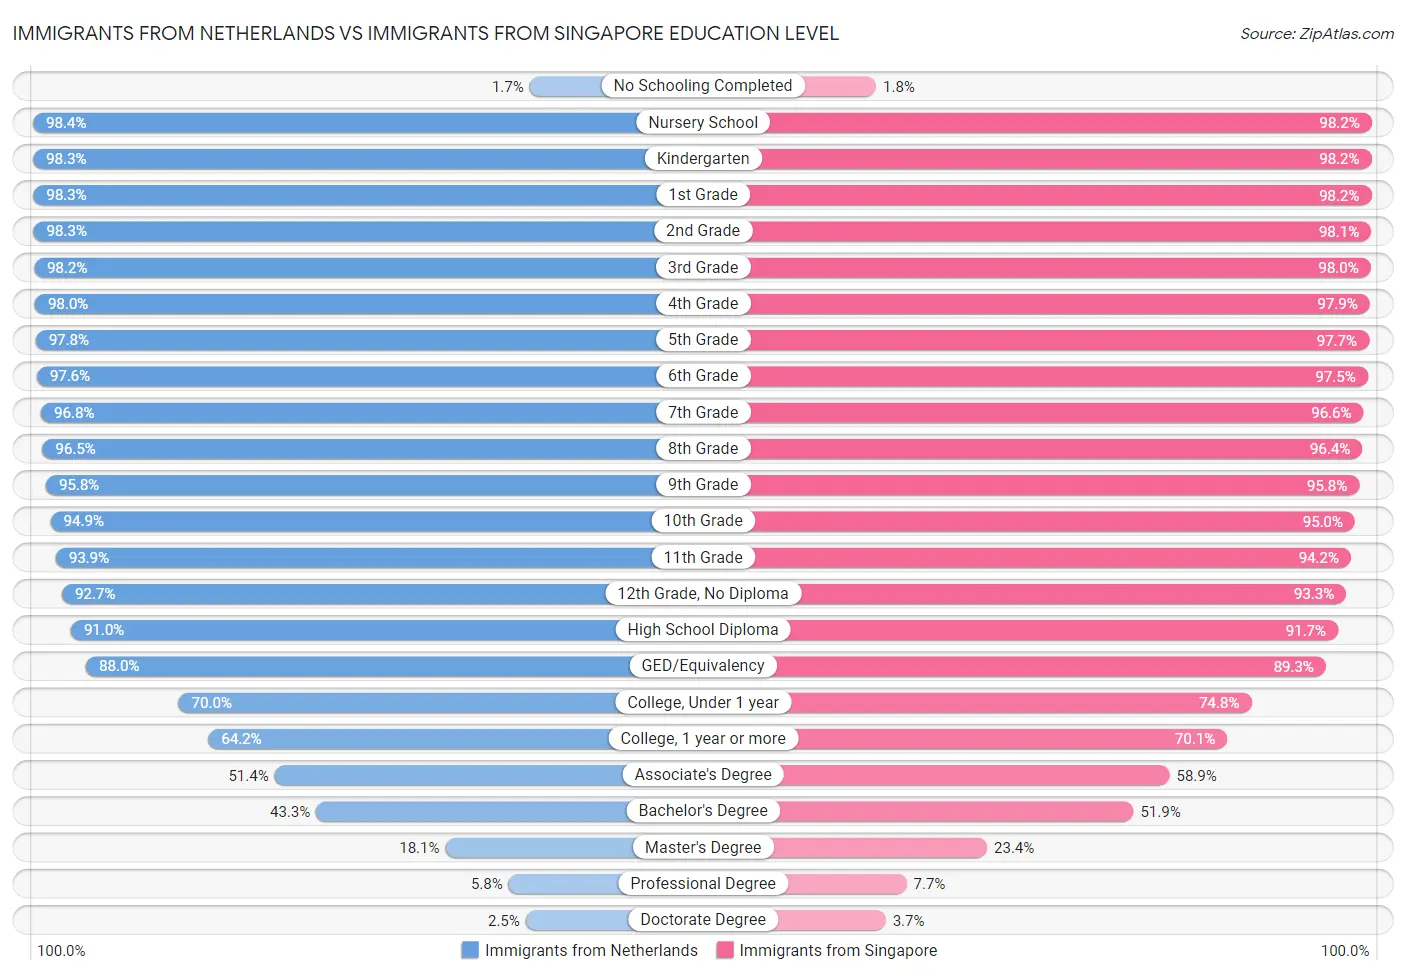 Immigrants from Netherlands vs Immigrants from Singapore Education Level